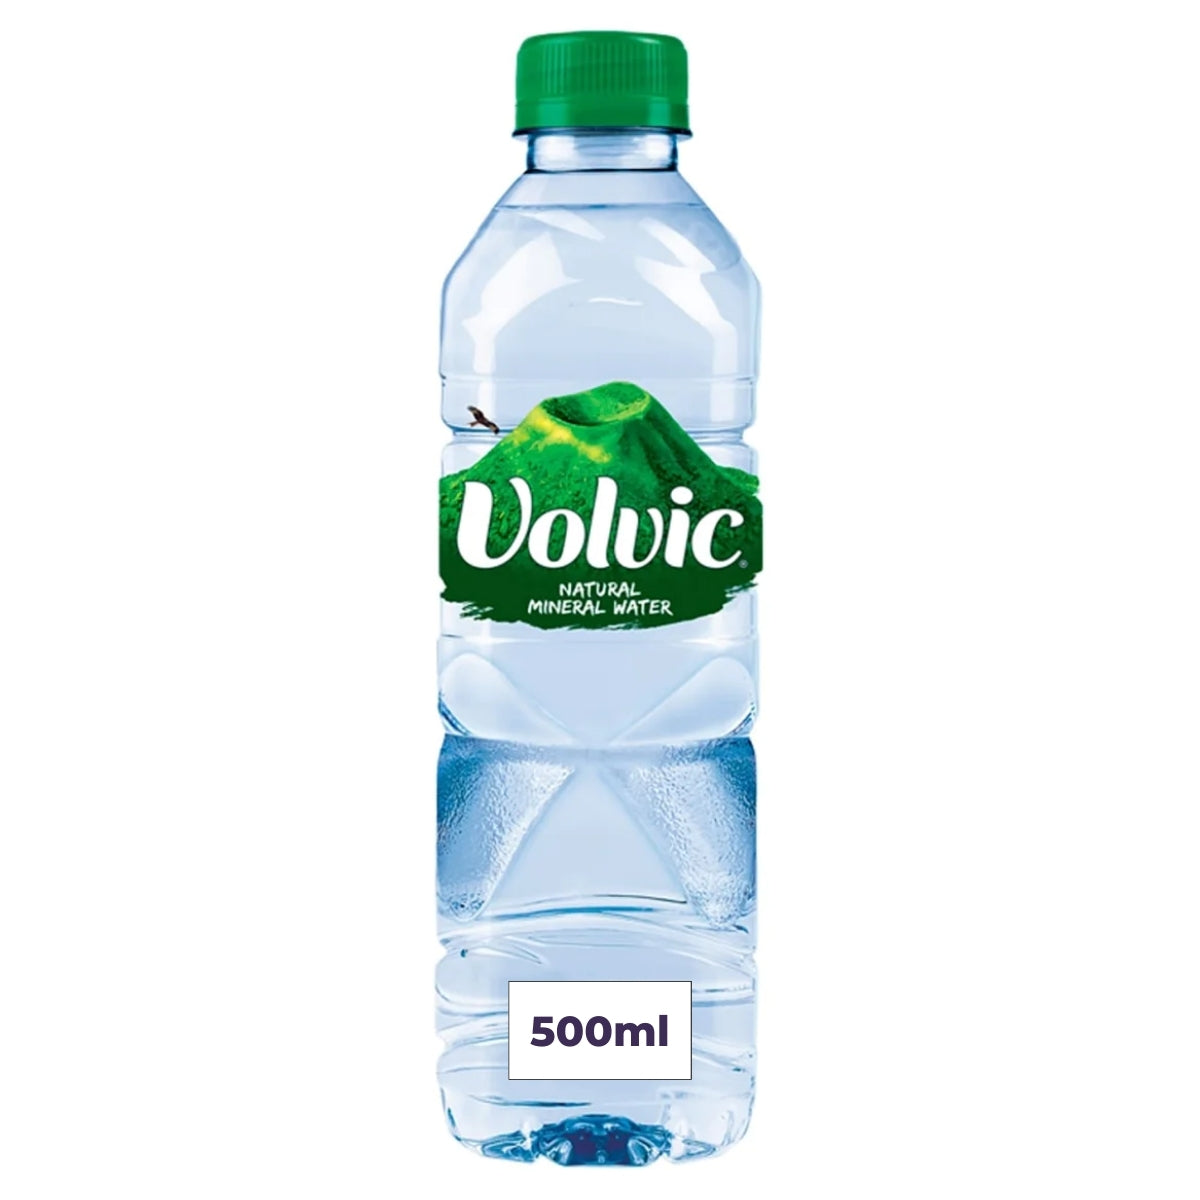 A Volvic - Natural Mineral Water - 500ml.